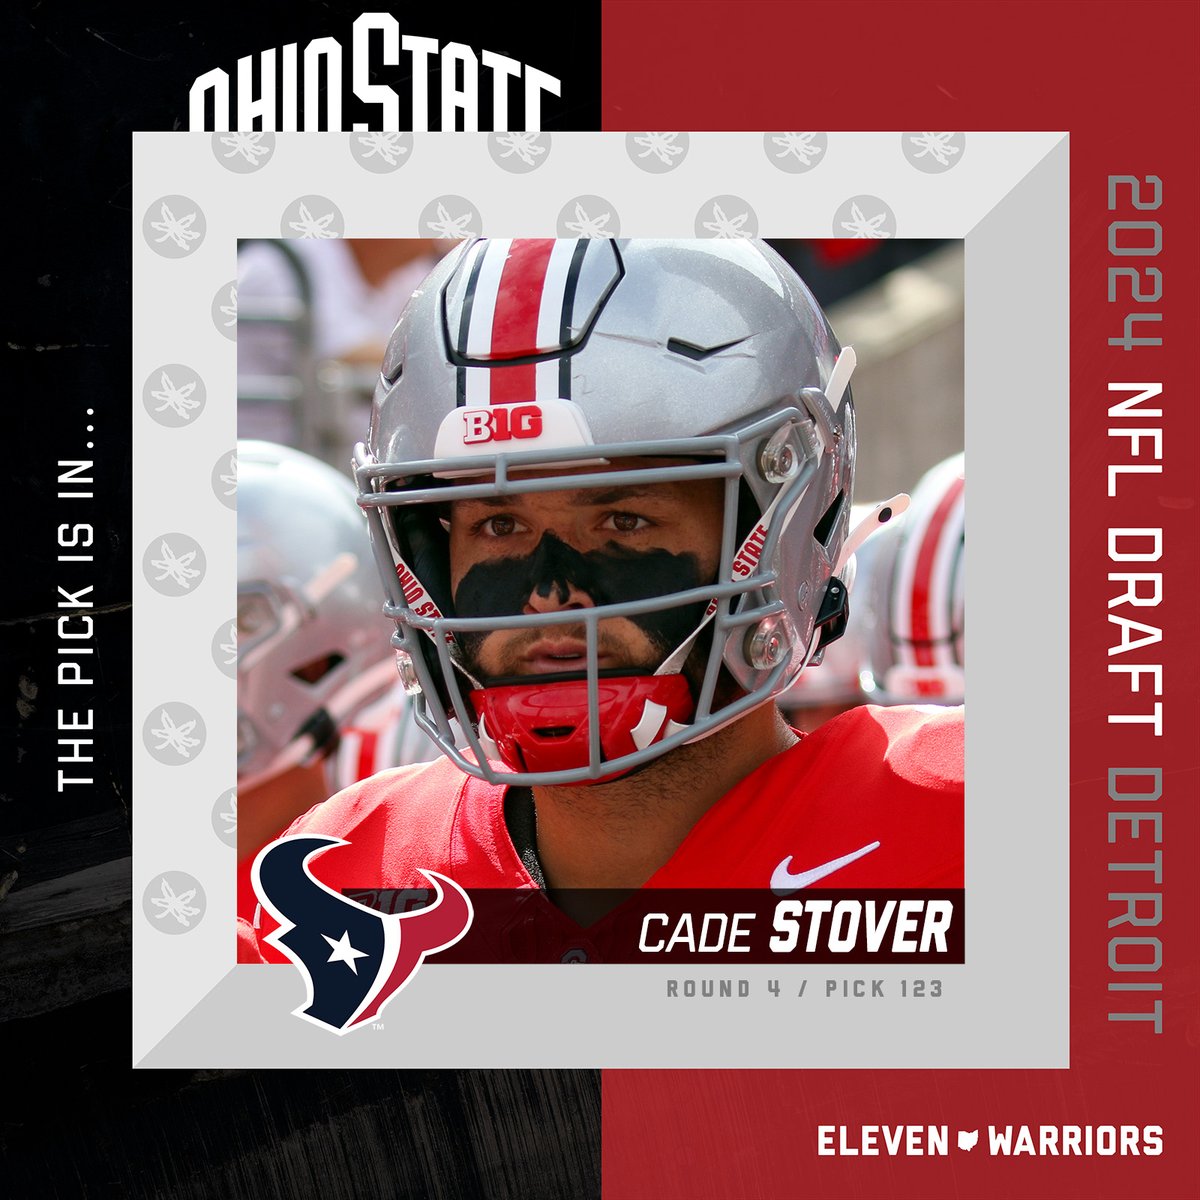 Cade Stover, YOU are a Houston Texan. @CJ7STROUD, how we feeling?